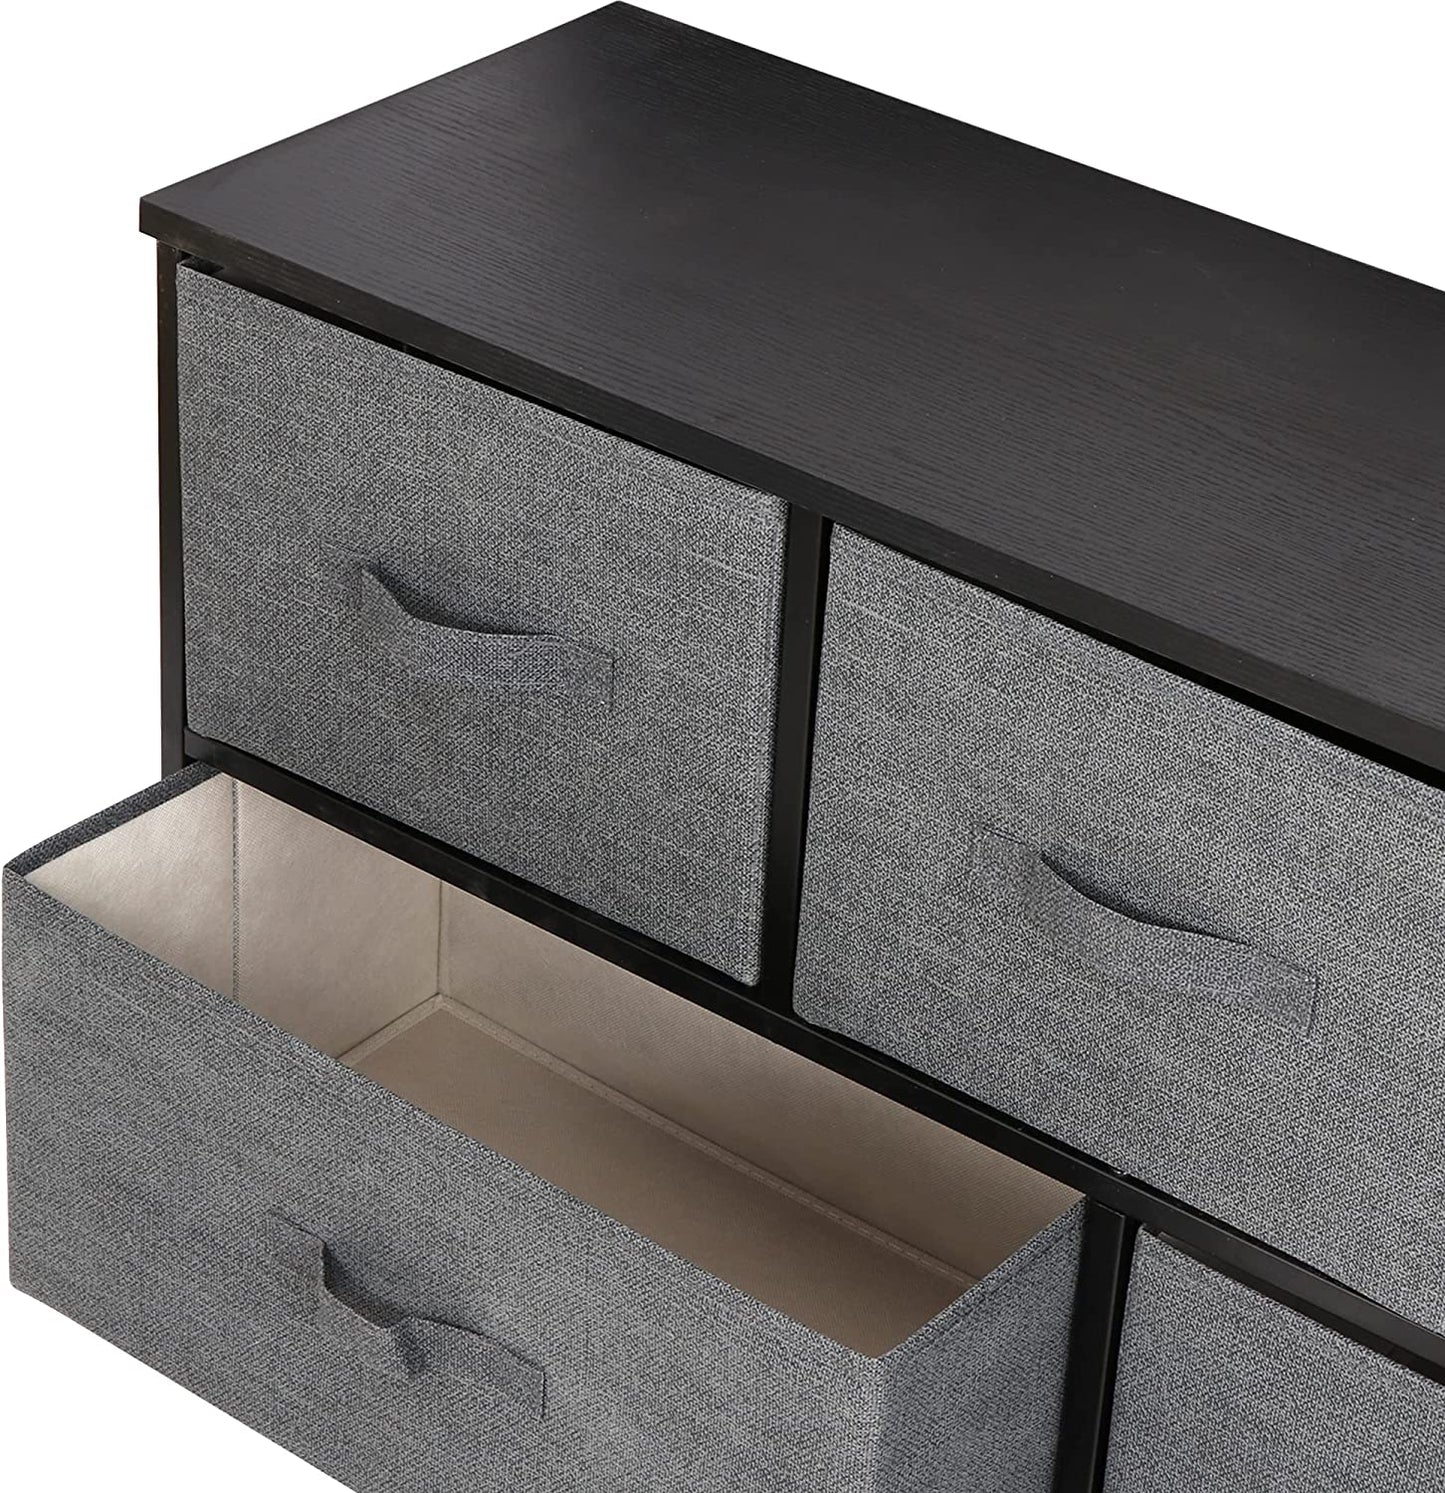 Extra Wide Dresser Storage Tower - Storage Tower Unit for Bedroom, Hallway, Closet, Office Organization - Steel Frame, Wood Top, Easy Pull Fabric Bins - 5 Drawers